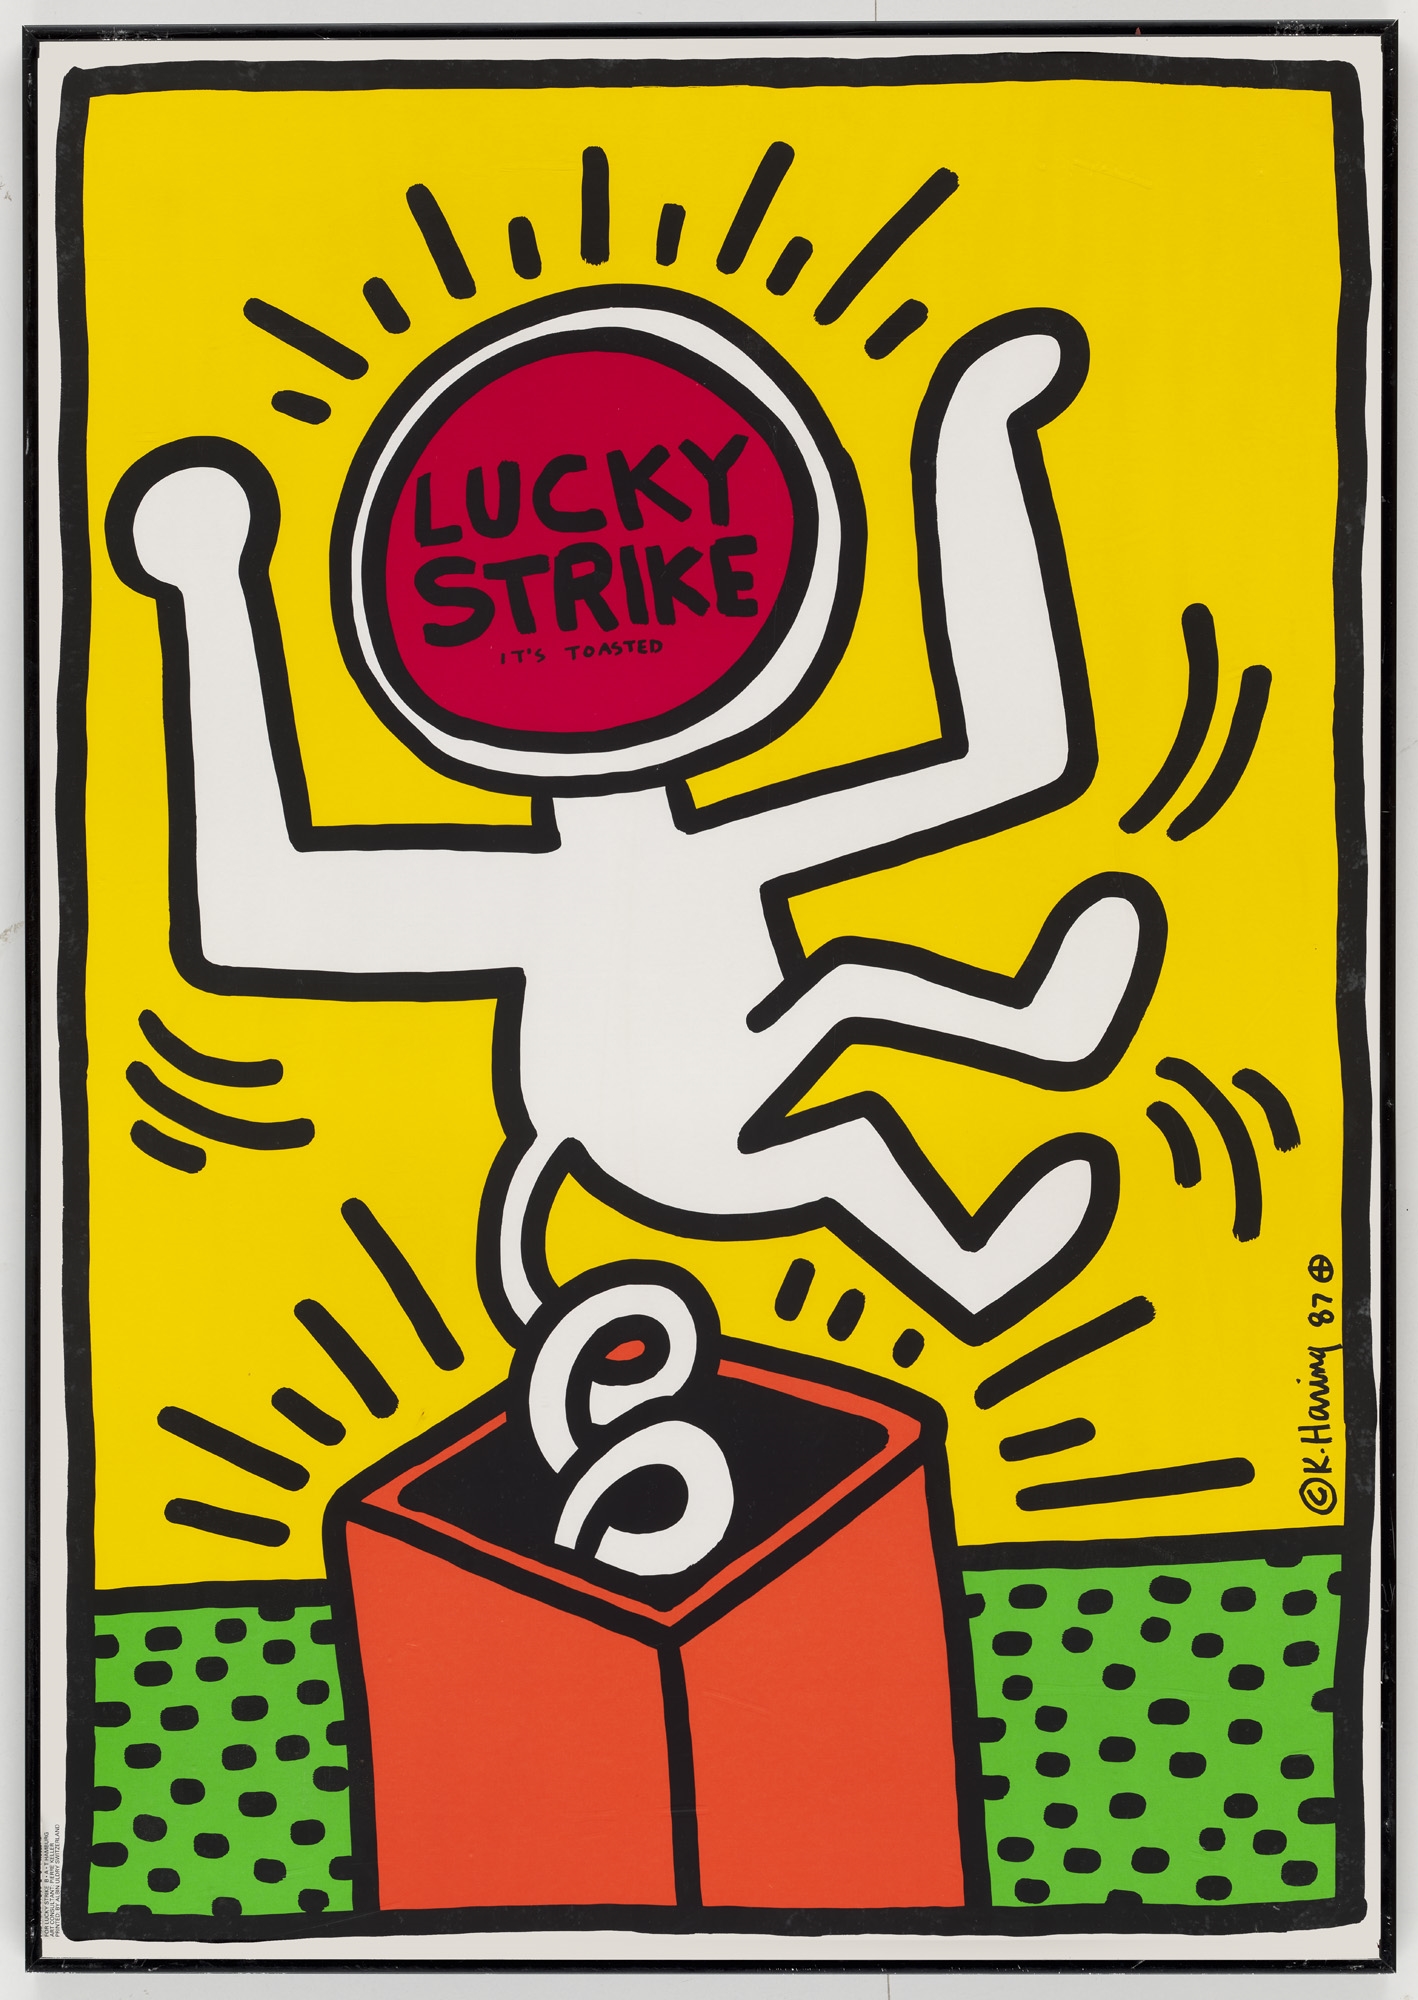 Lucky Strike (gelb). 1987 by Keith Haring, 1987